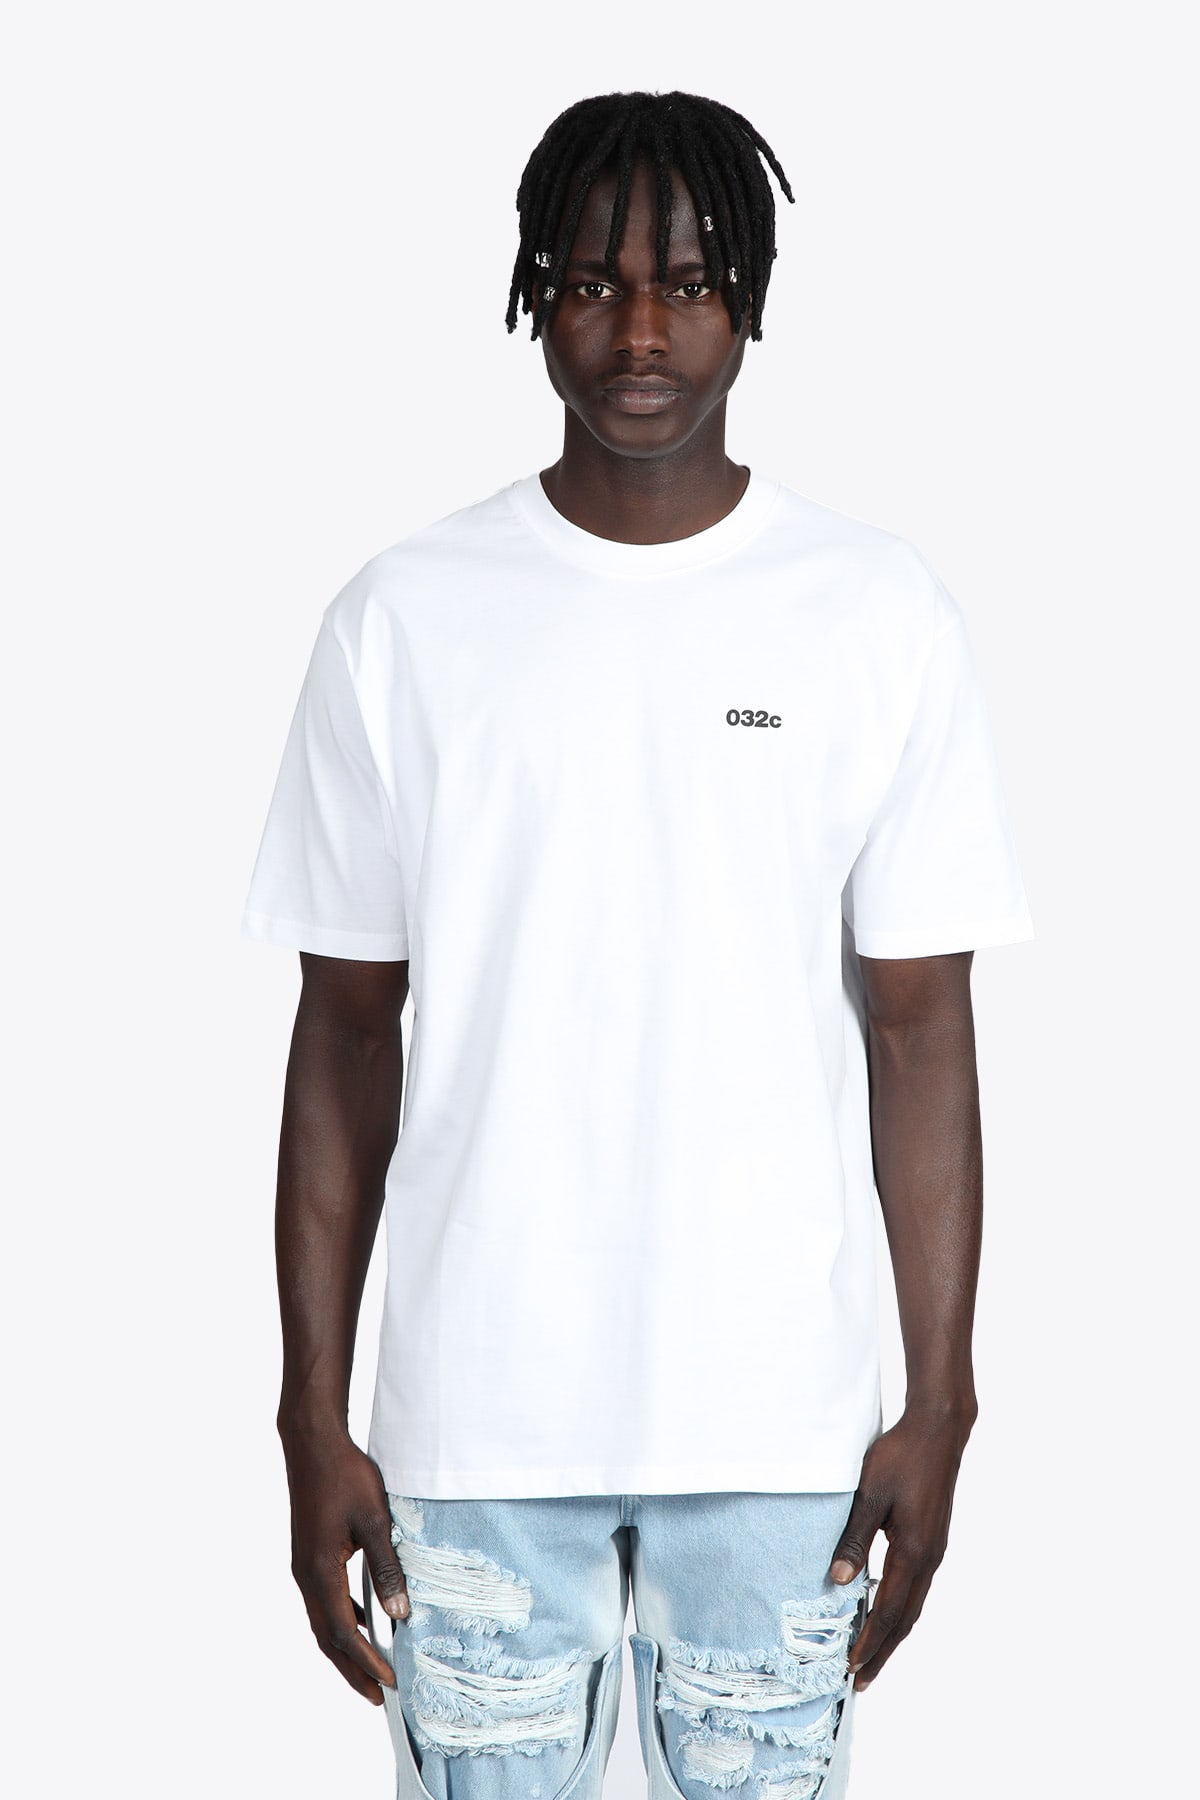 032c St. Marks Tee White cotton t-shirt with chest logo - St. Marks Tee